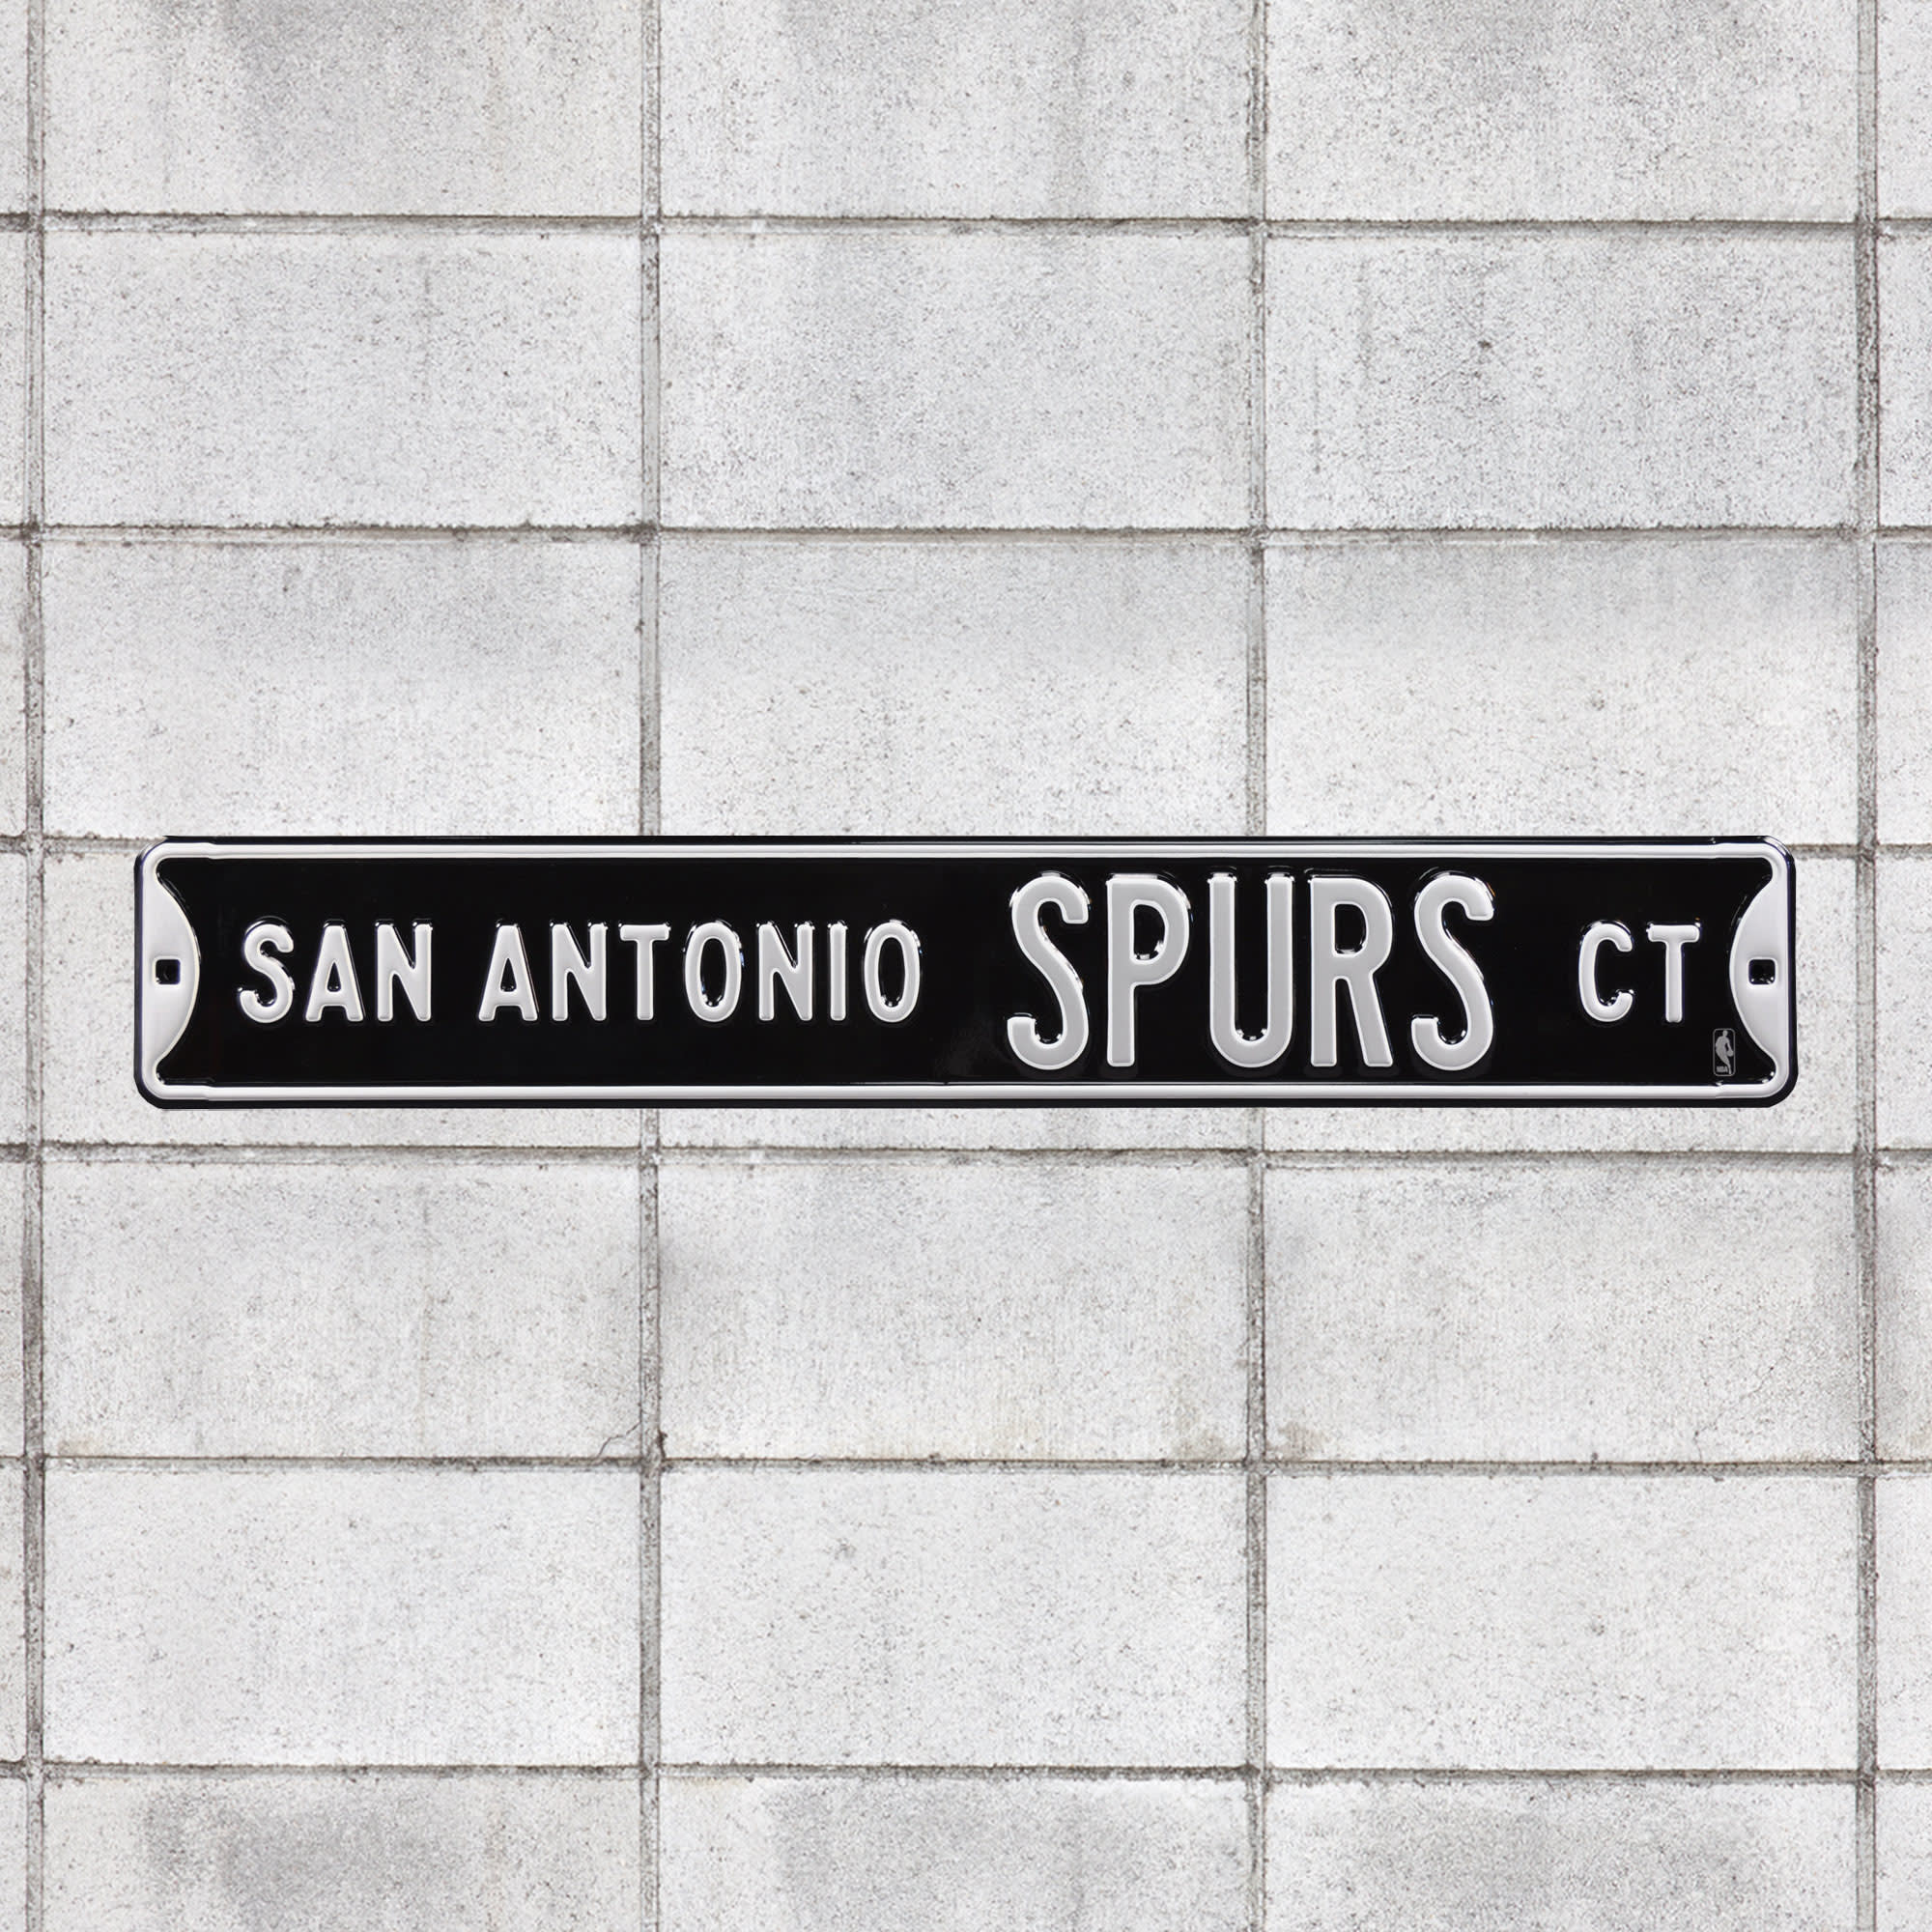 San Antonio Spurs: Court - Officially Licensed NBA Metal Street Sign 36.0"W x 6.0"H by Fathead | 100% Steel